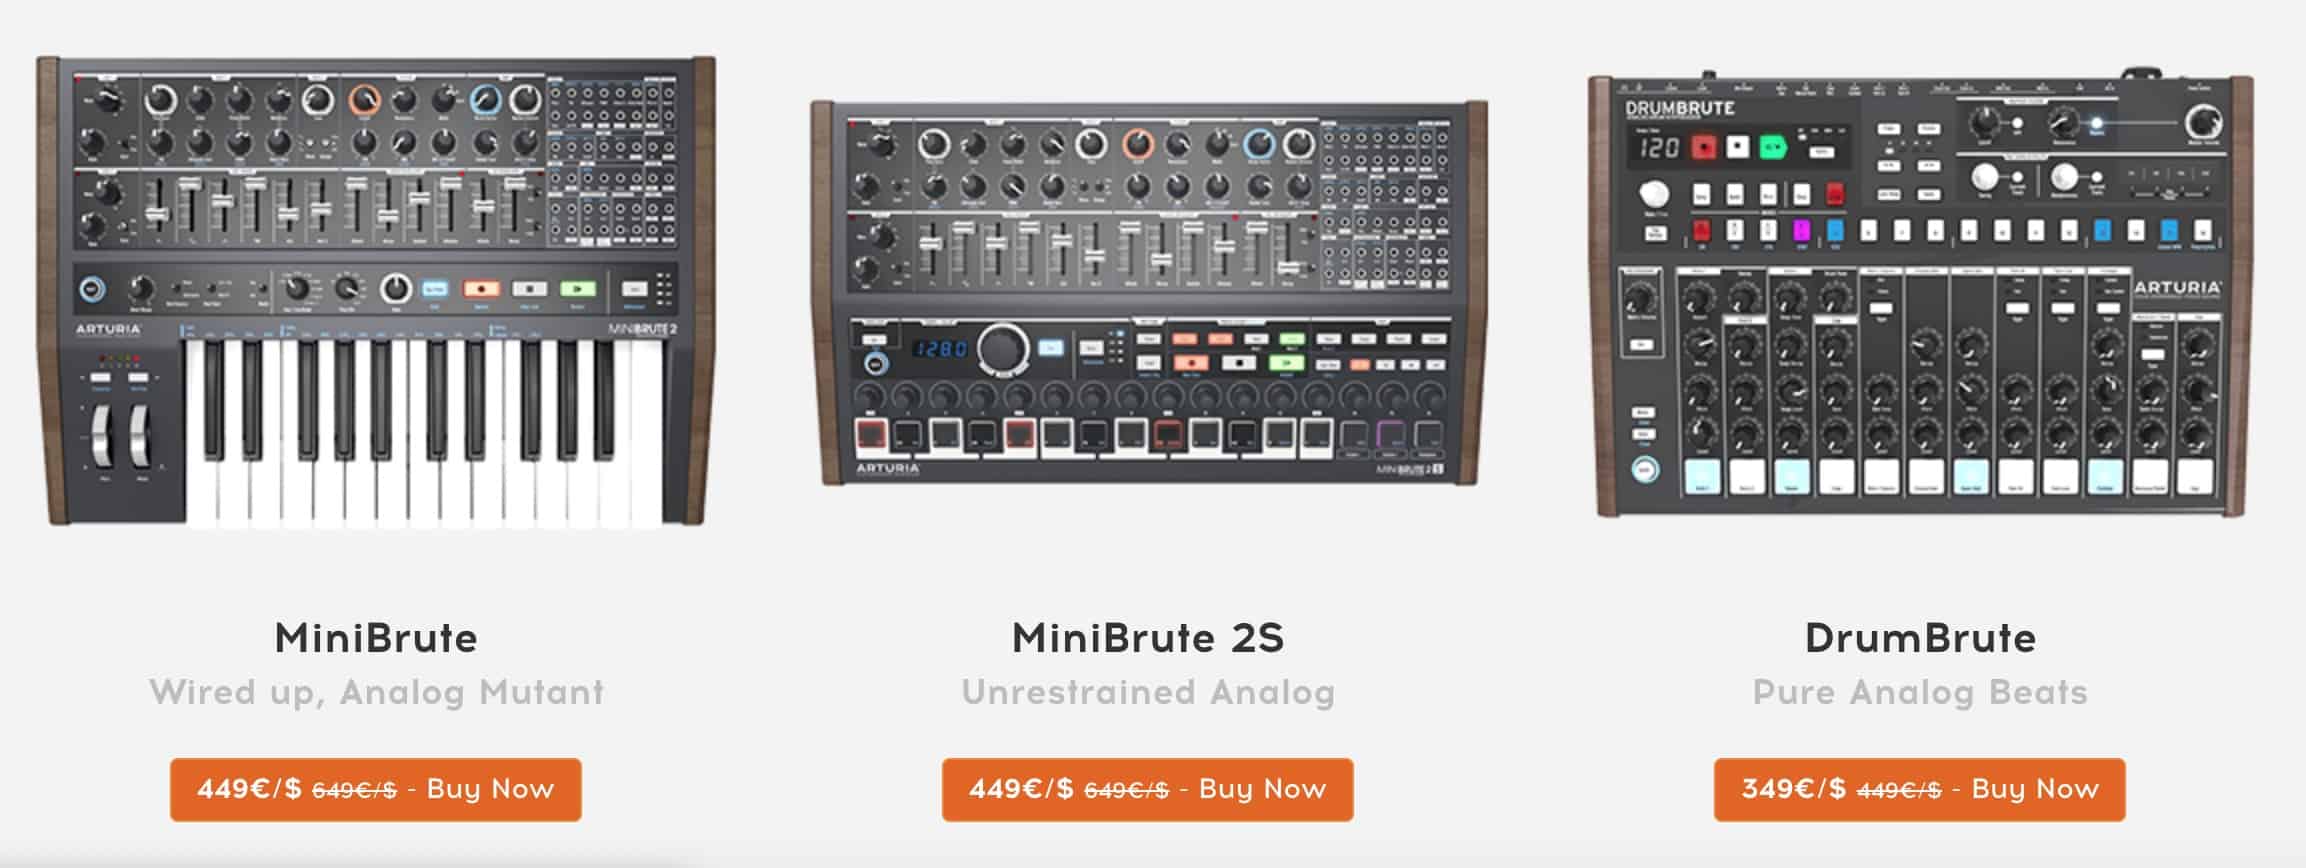 Arturia Announces In-store Black Friday Offer: Up To 50% Off Selected Hardware Synths